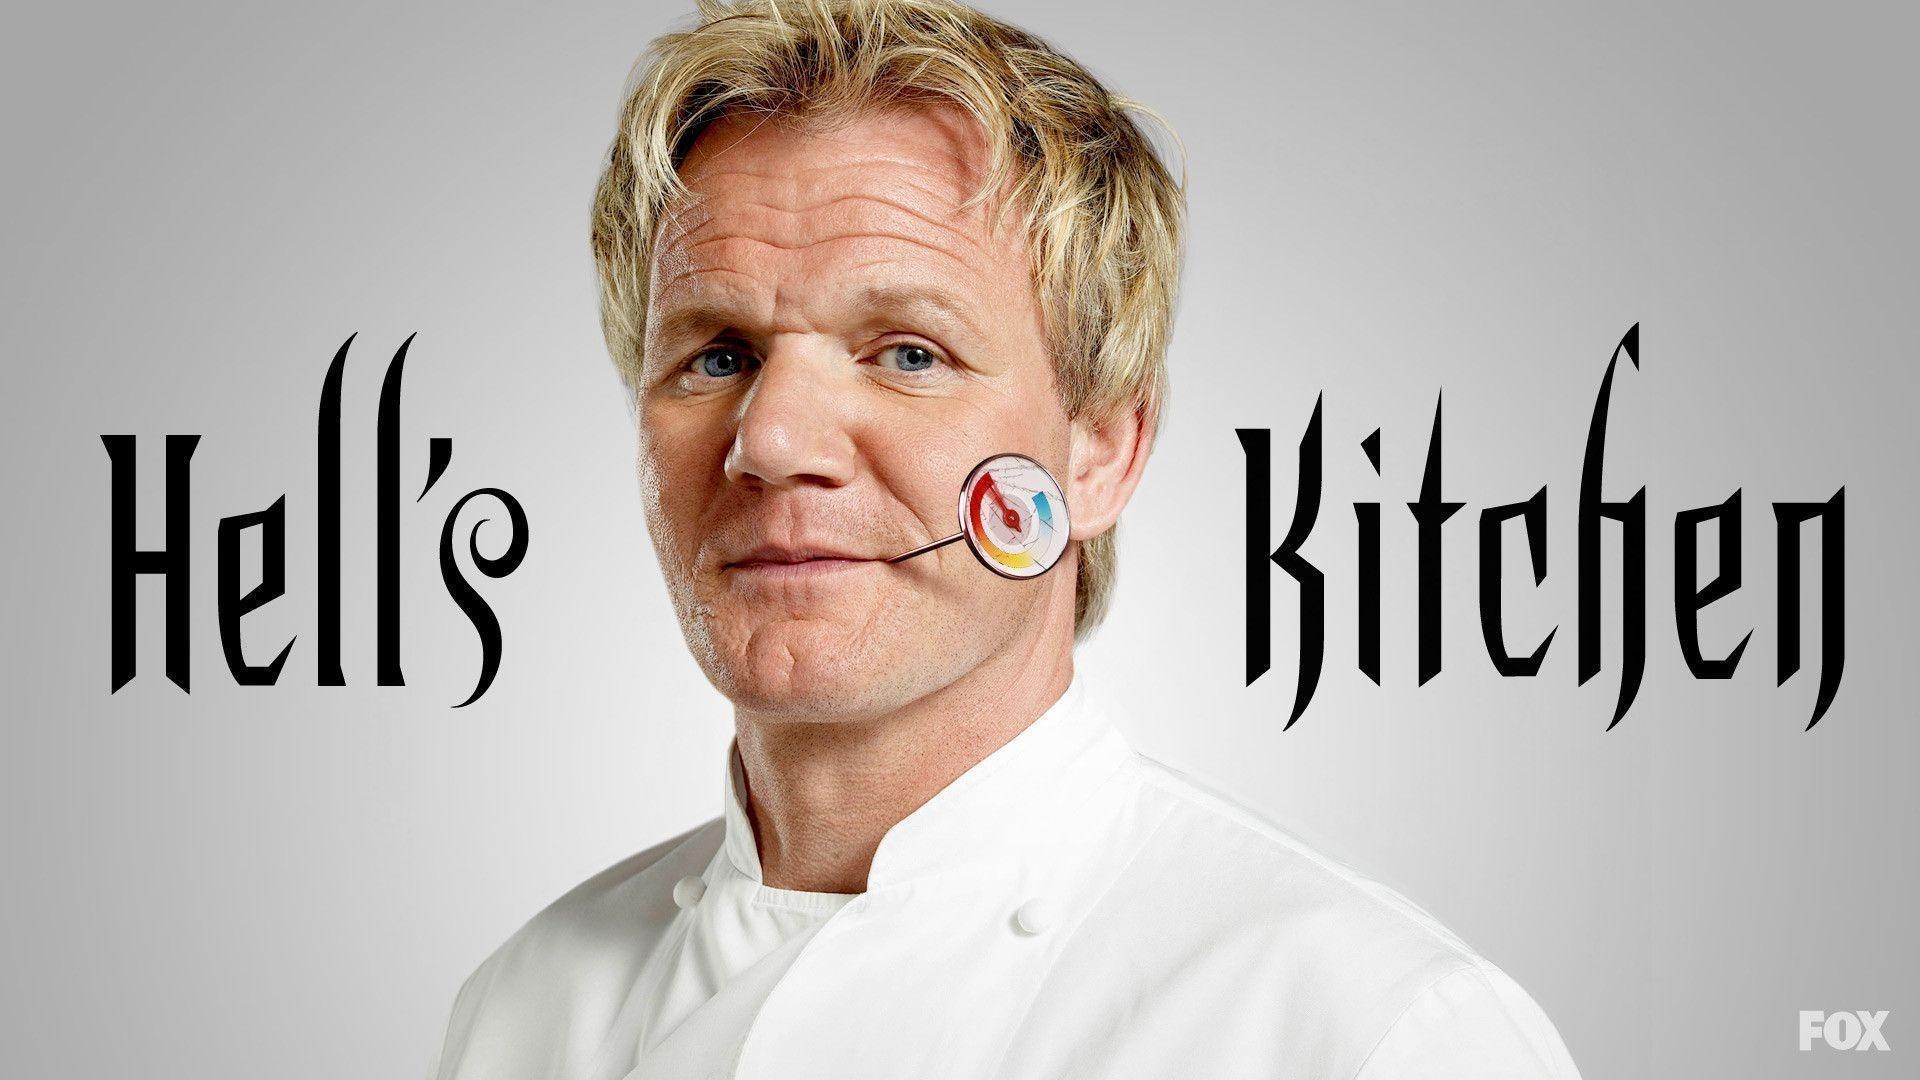 Gordon Ramsay: Hosted an American reality competition cooking show, Hell's Kitchen. 1920x1080 Full HD Wallpaper.